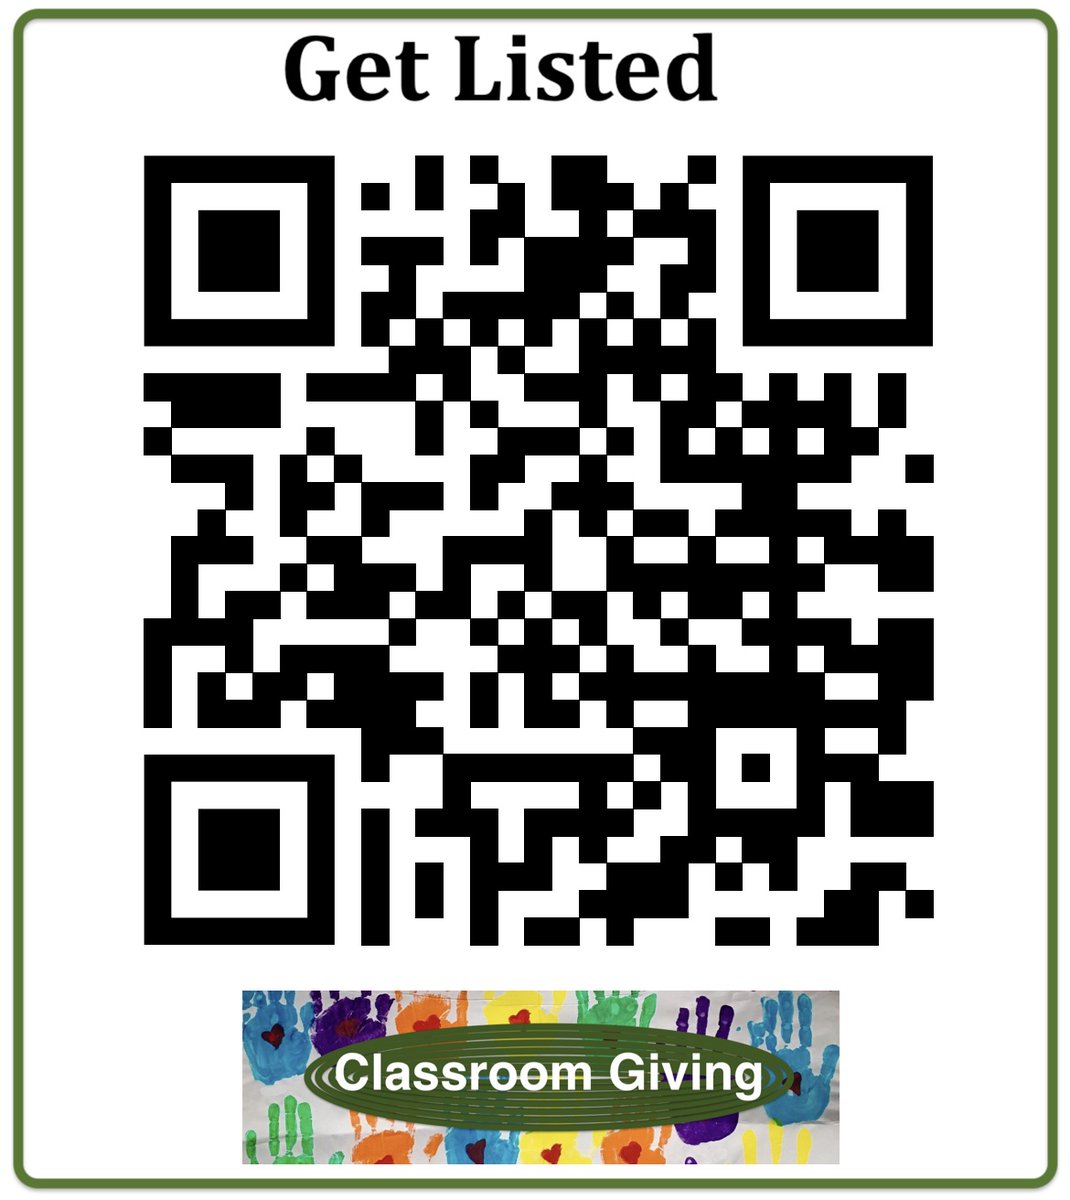 Dear Teachers,

Please print this QR code and hang it on the bulletin board at the teachers' lounge to allow more classrooms to be listed on classroomgiving.org and receive school-supplies.
#PreK #PreKteachers #preschoolteachers #preschoolteacher #kingergarden